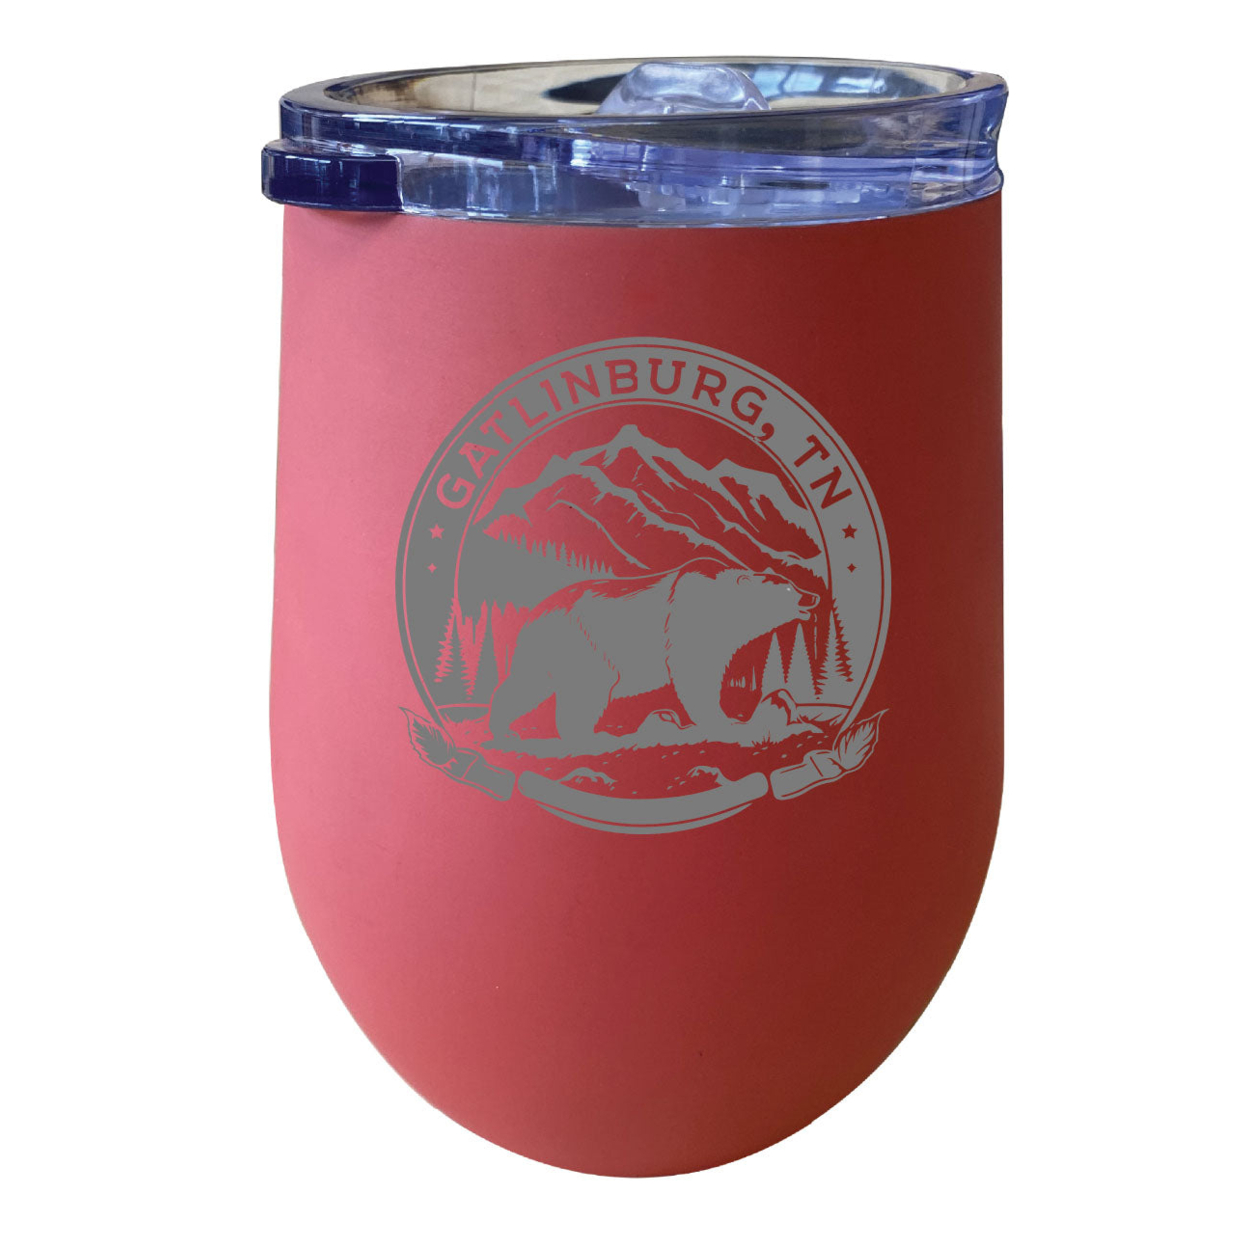 Gatlinburg Tennessee Laser Etched Souvenir 12 Oz Insulated Wine Stainless Steel Tumbler - White